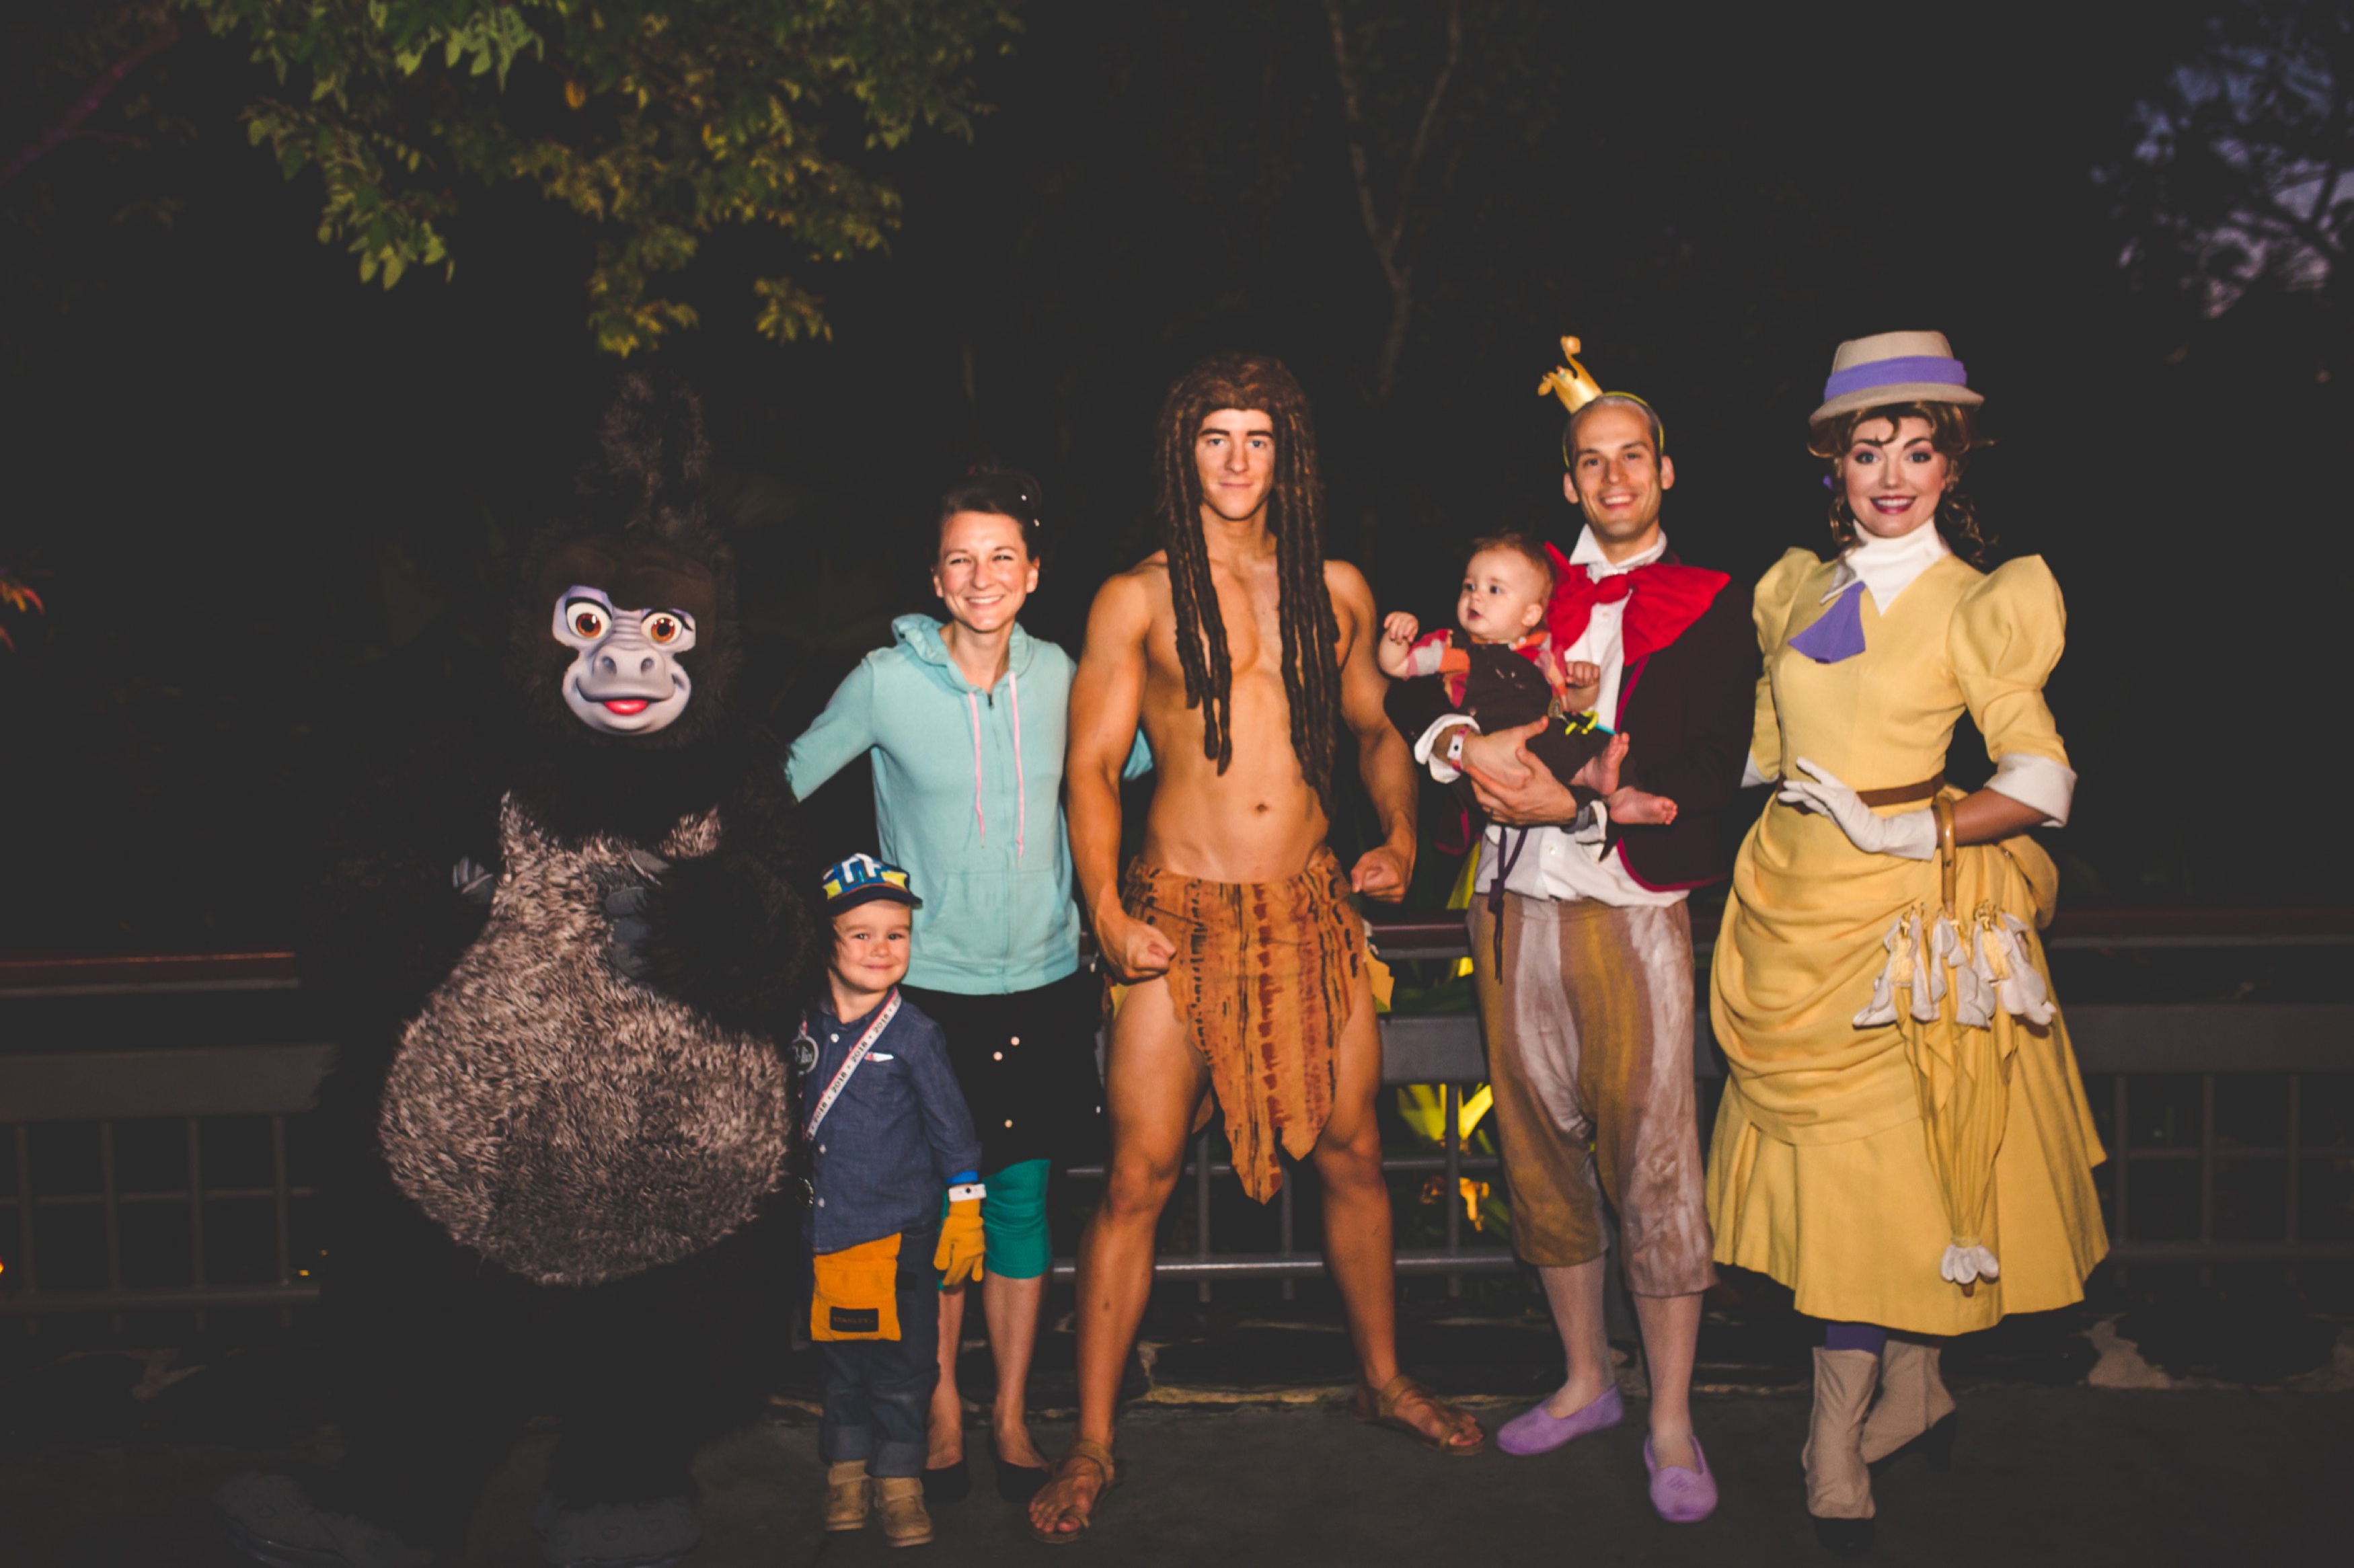 Mickey's Not So Scary Halloween Party Review and Tips 